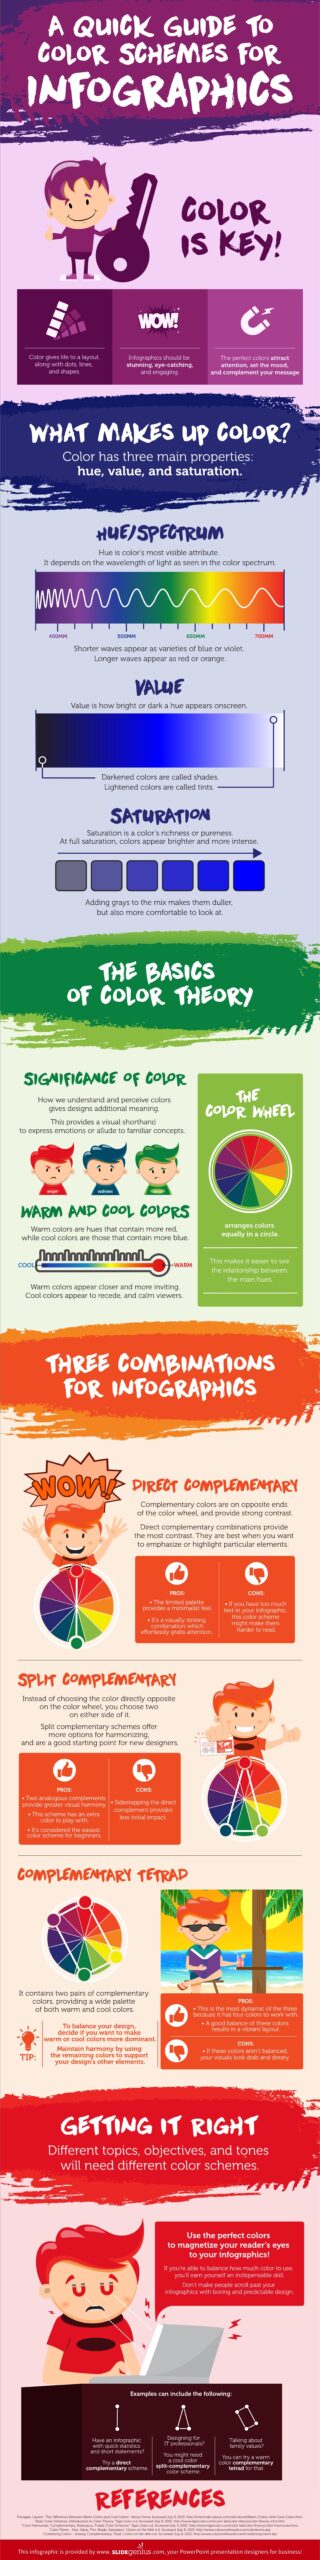 Color Infographic Stock Illustration - Image: 54392687